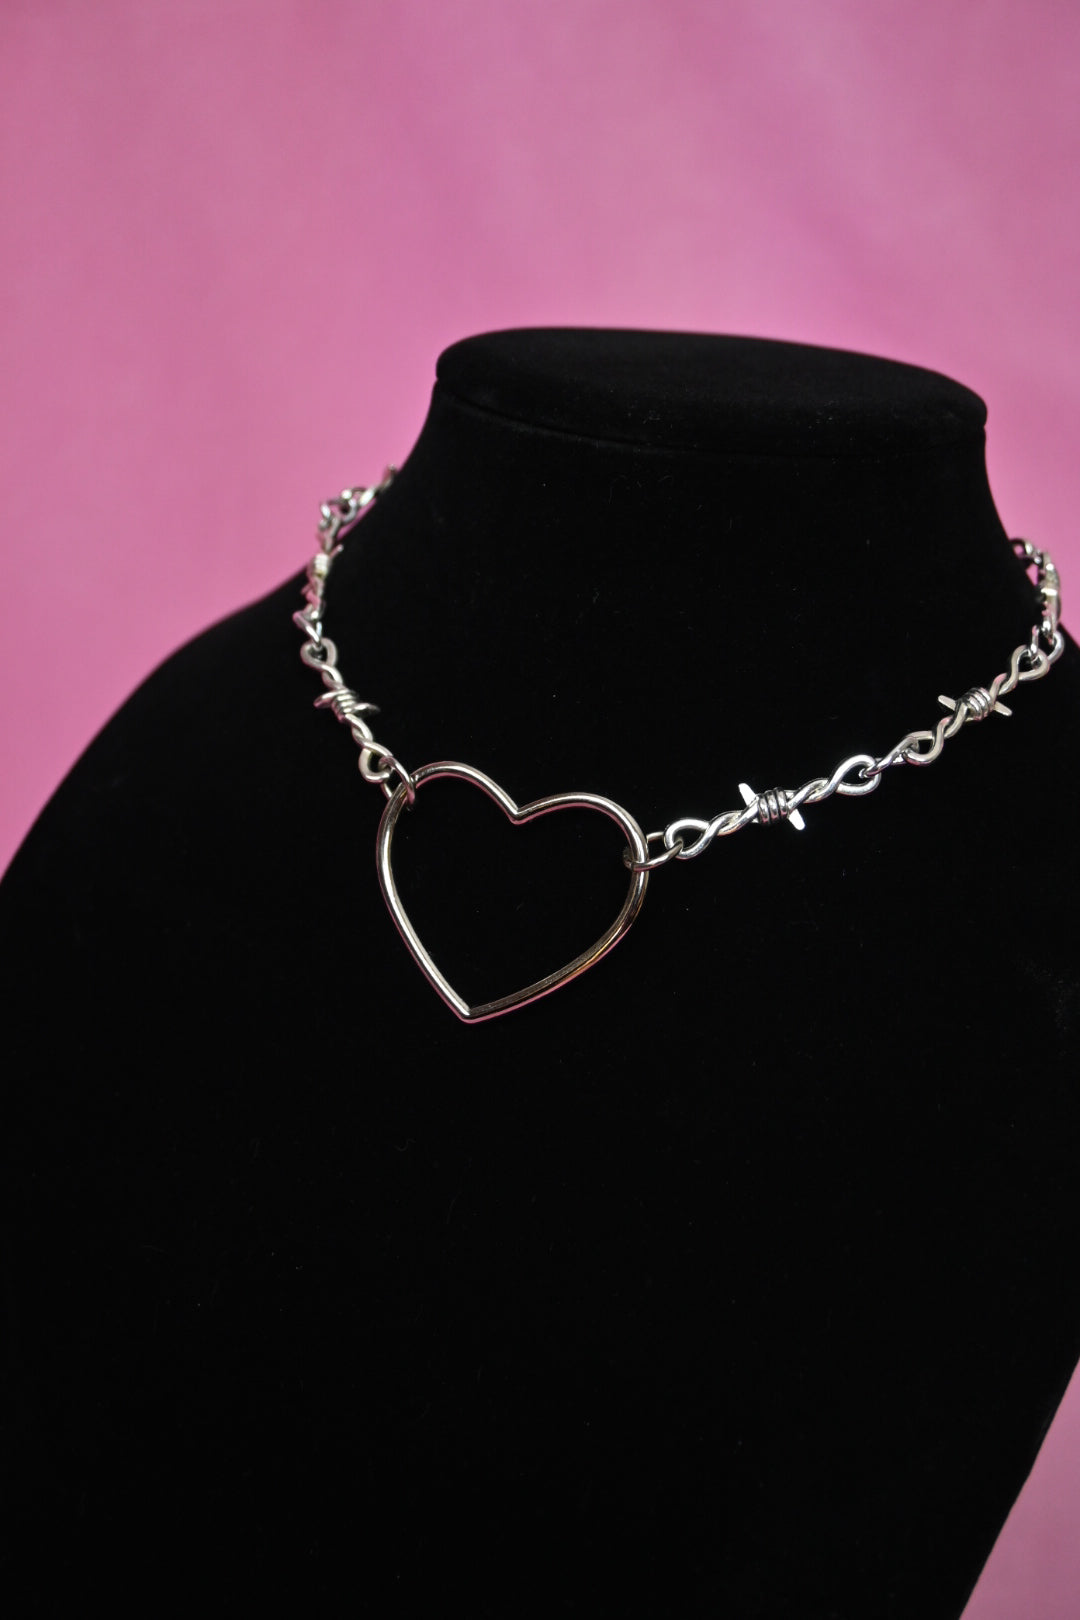 Barbed wire heart choker